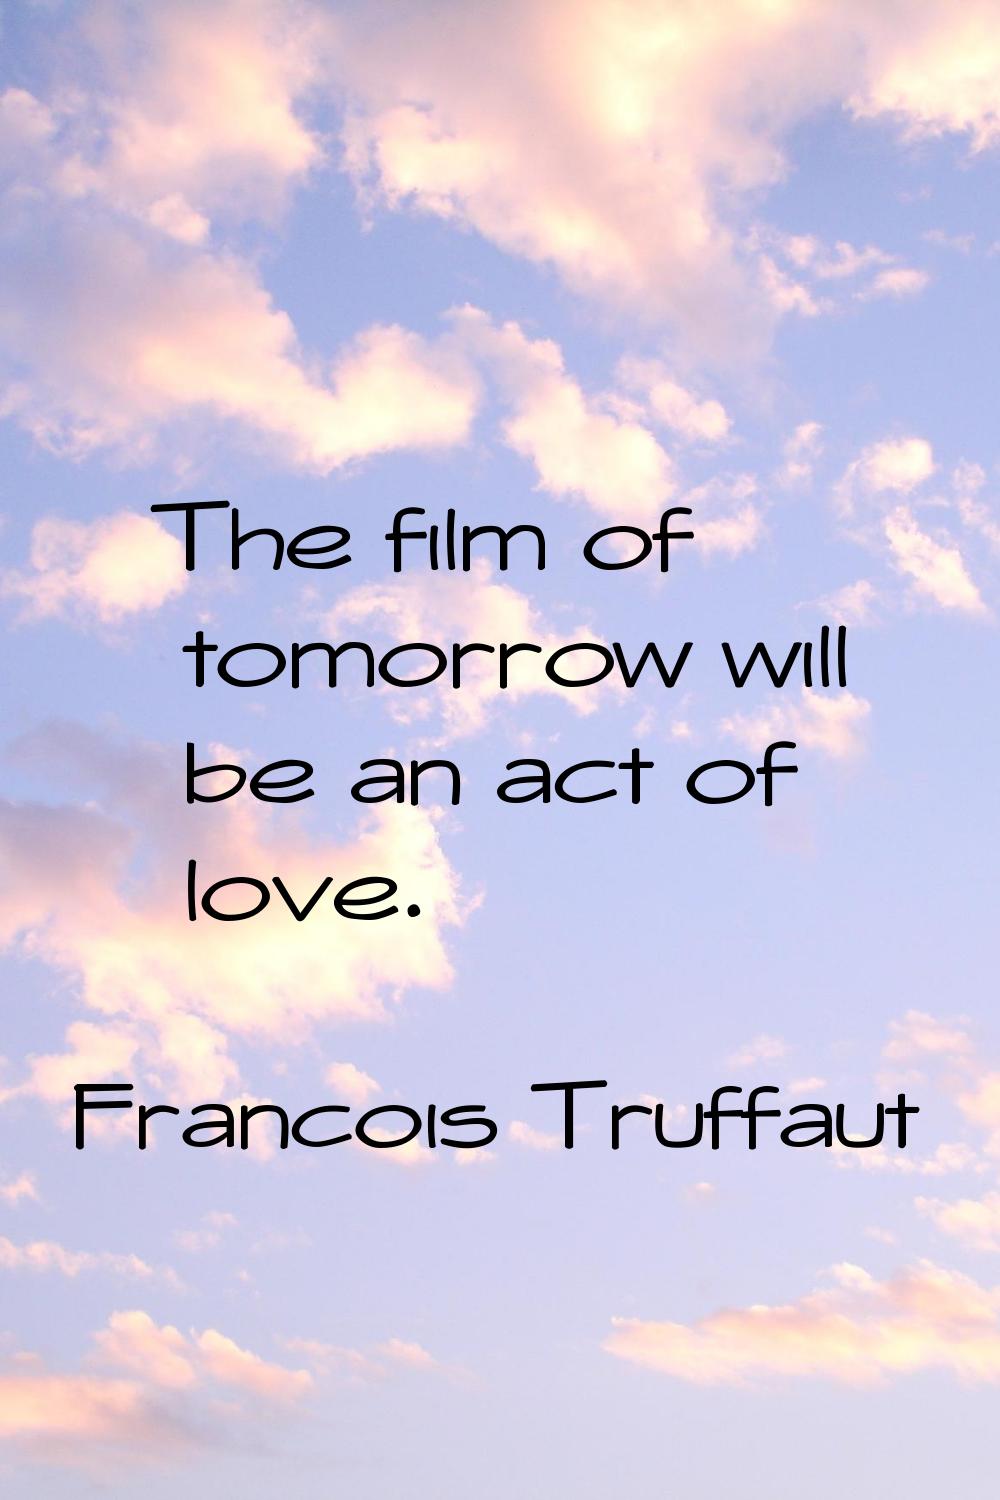 The film of tomorrow will be an act of love.